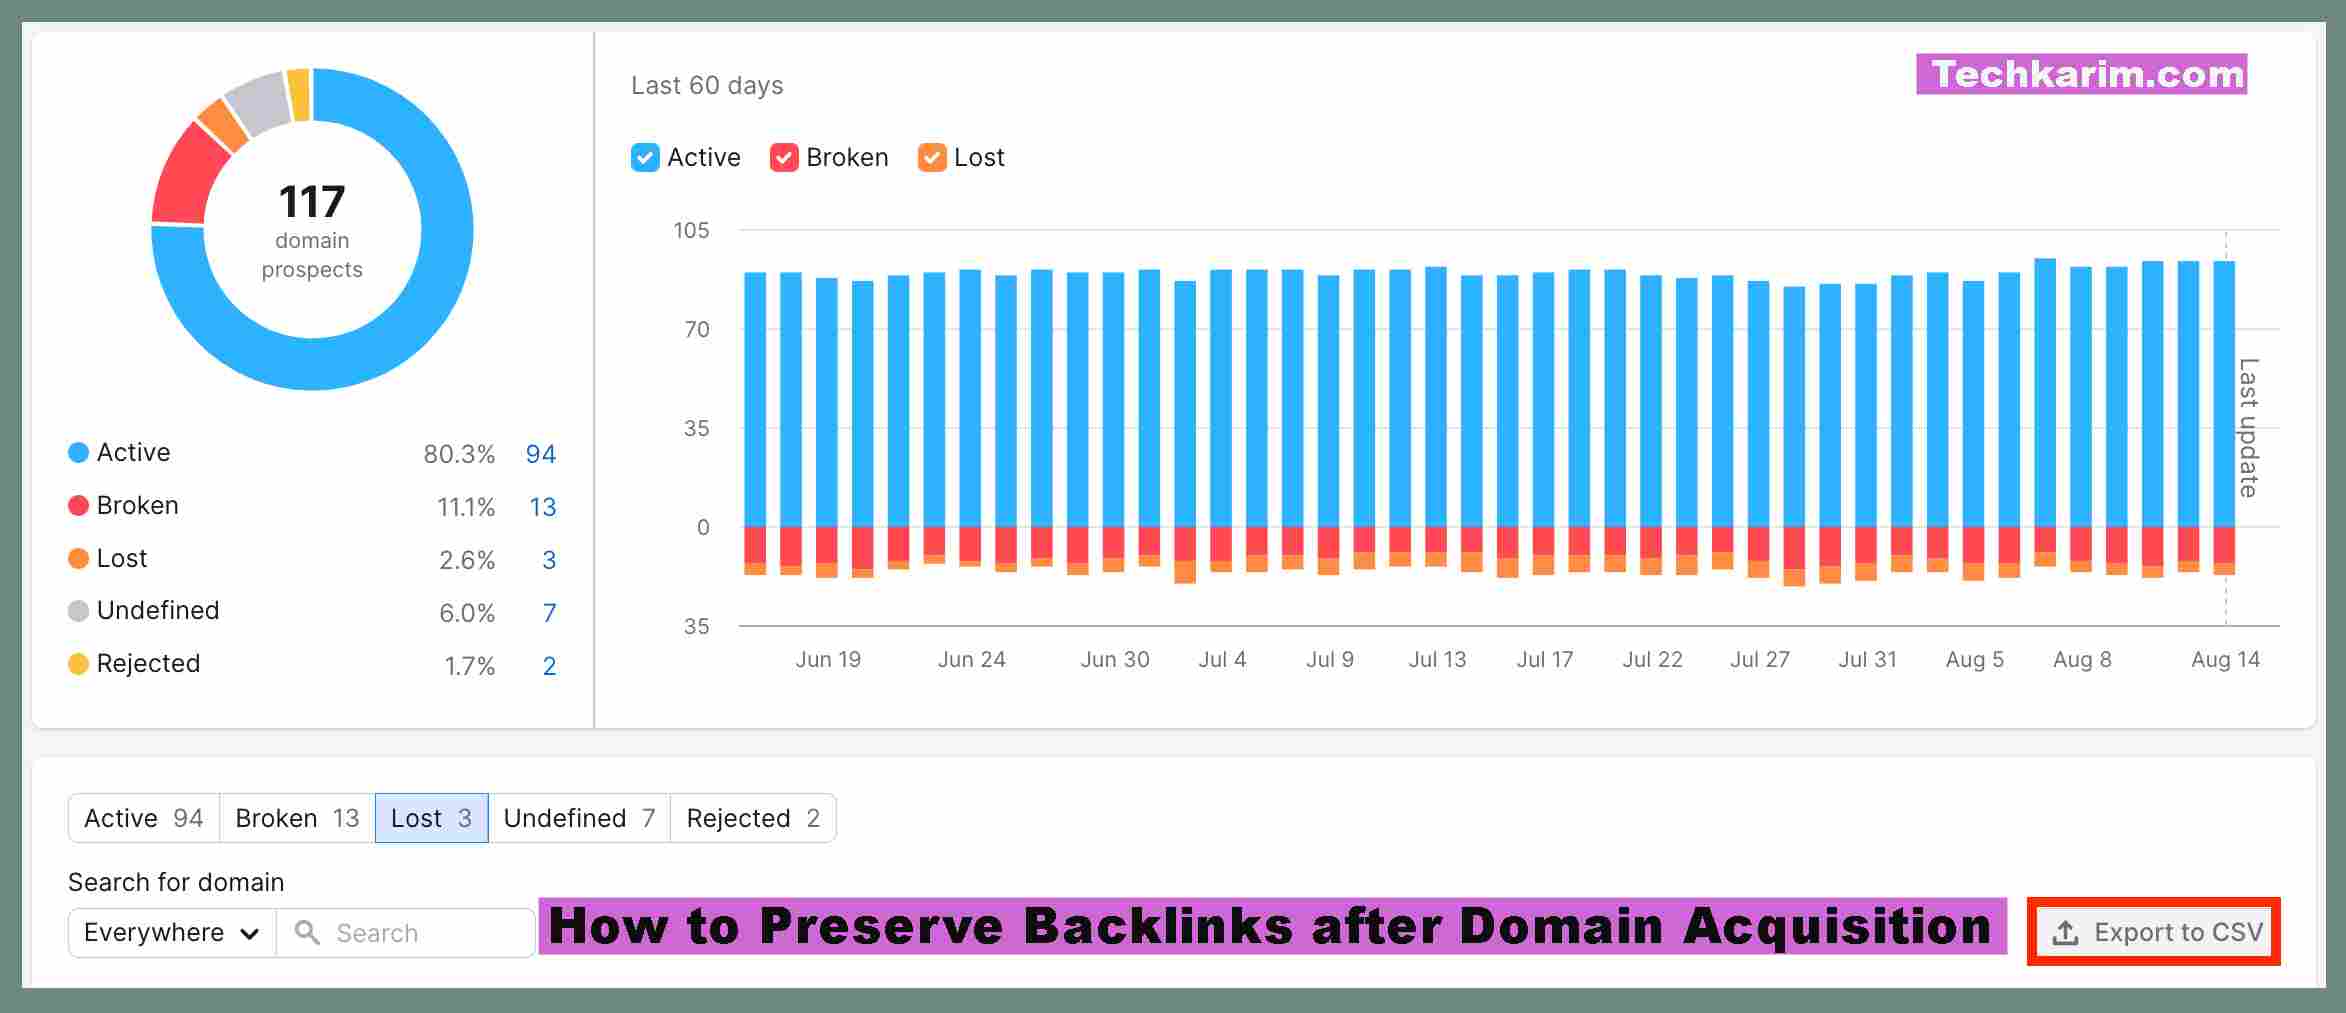 How to Preserve Backlinks after Domain Acquisition